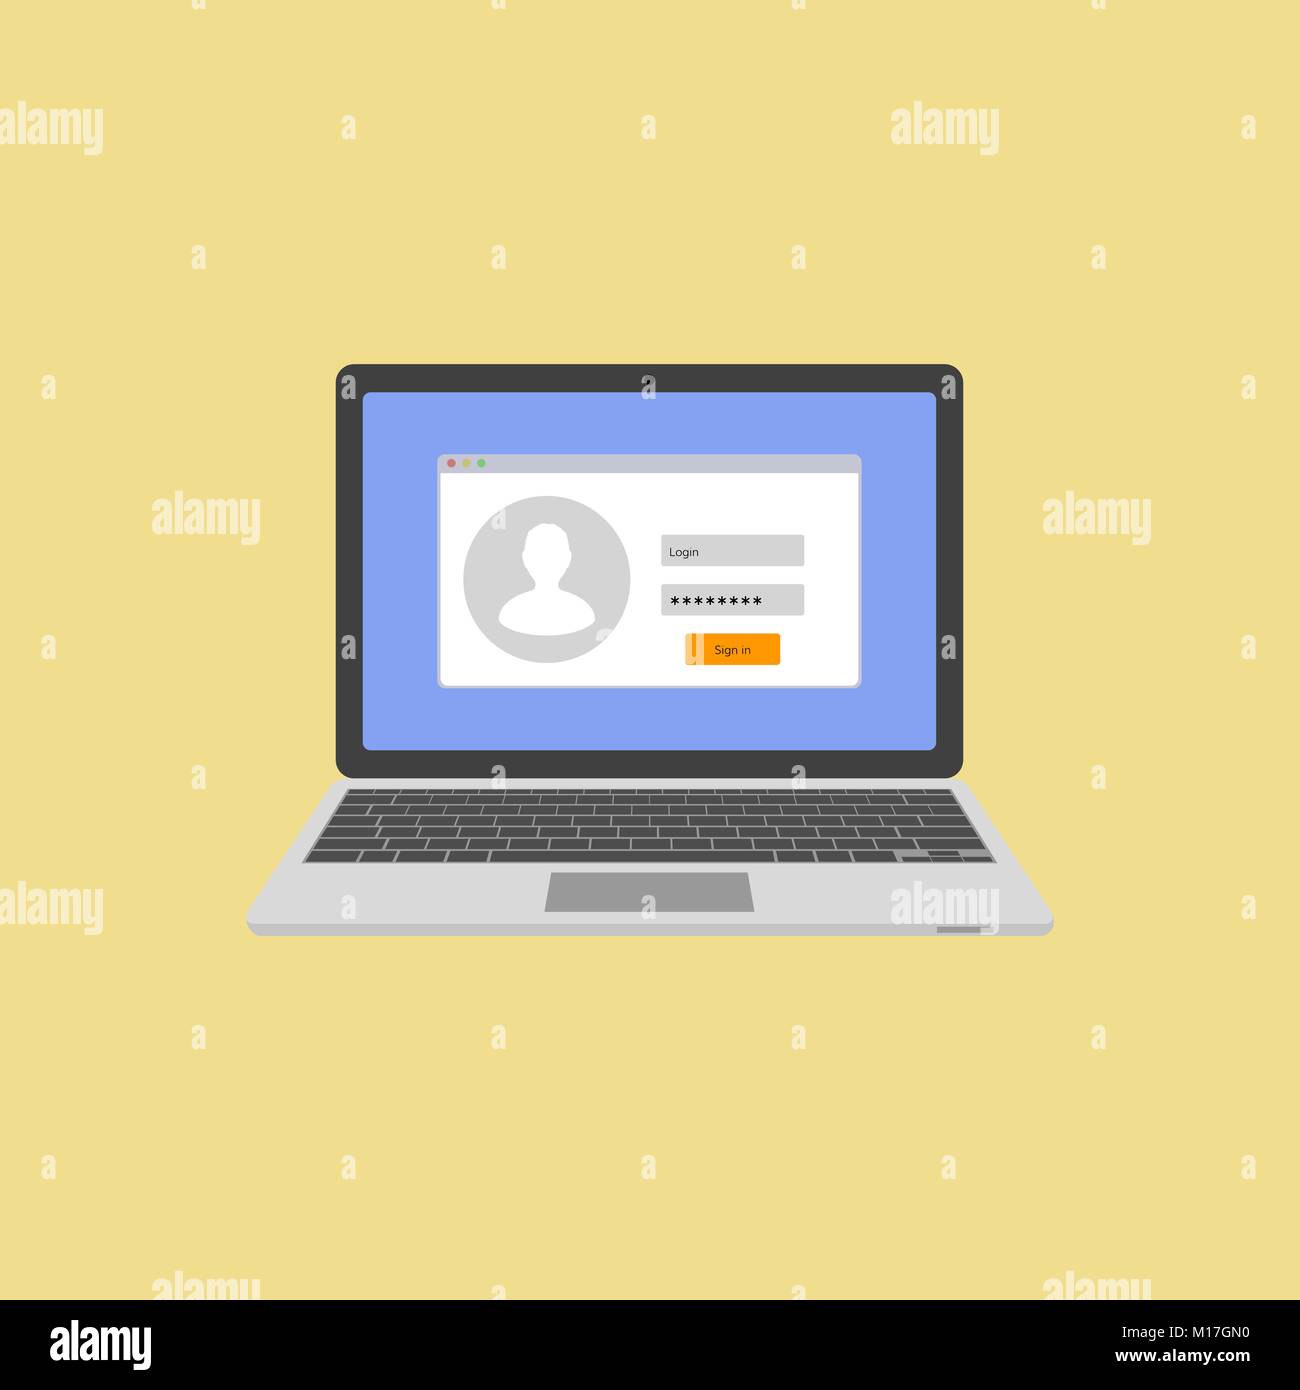 Laptop with authorization on the screen. Login and password of the user. Login to the system or account. Vector illustration Stock Vector